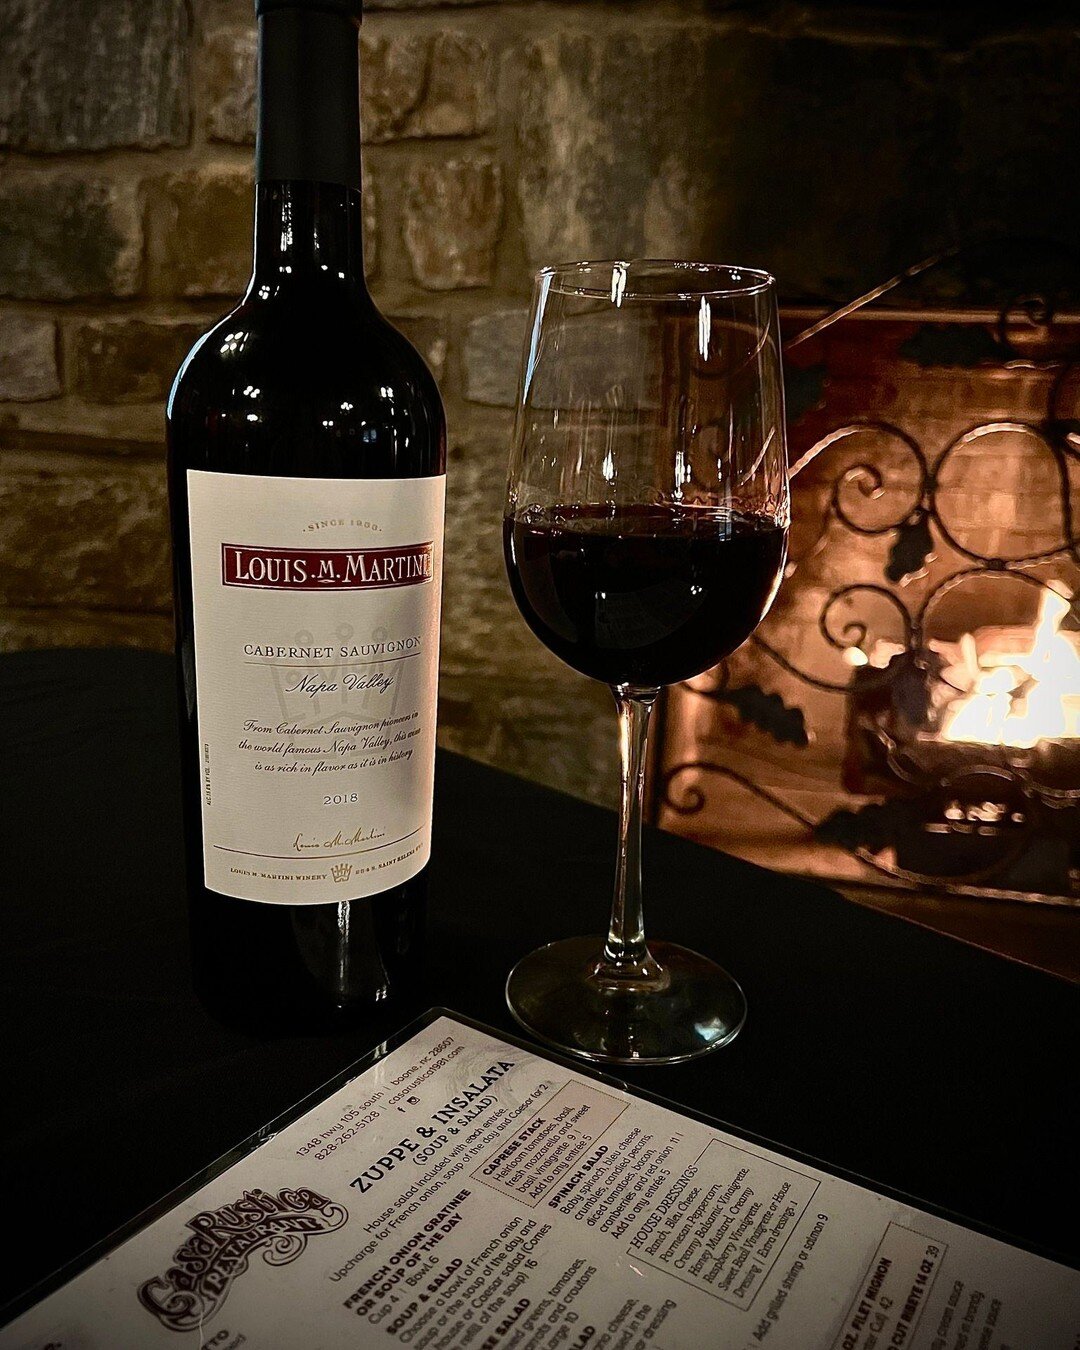 Casa Rustica offers exquisite, traditional red wines from Italy!  Try a bottle with your favorite entr&eacute;e tonight.
.
.
#wine #redwine #italian #italianredwine #importedwine #italianamerican #casarustica #food #foodie #drinks #dinnertime #highco